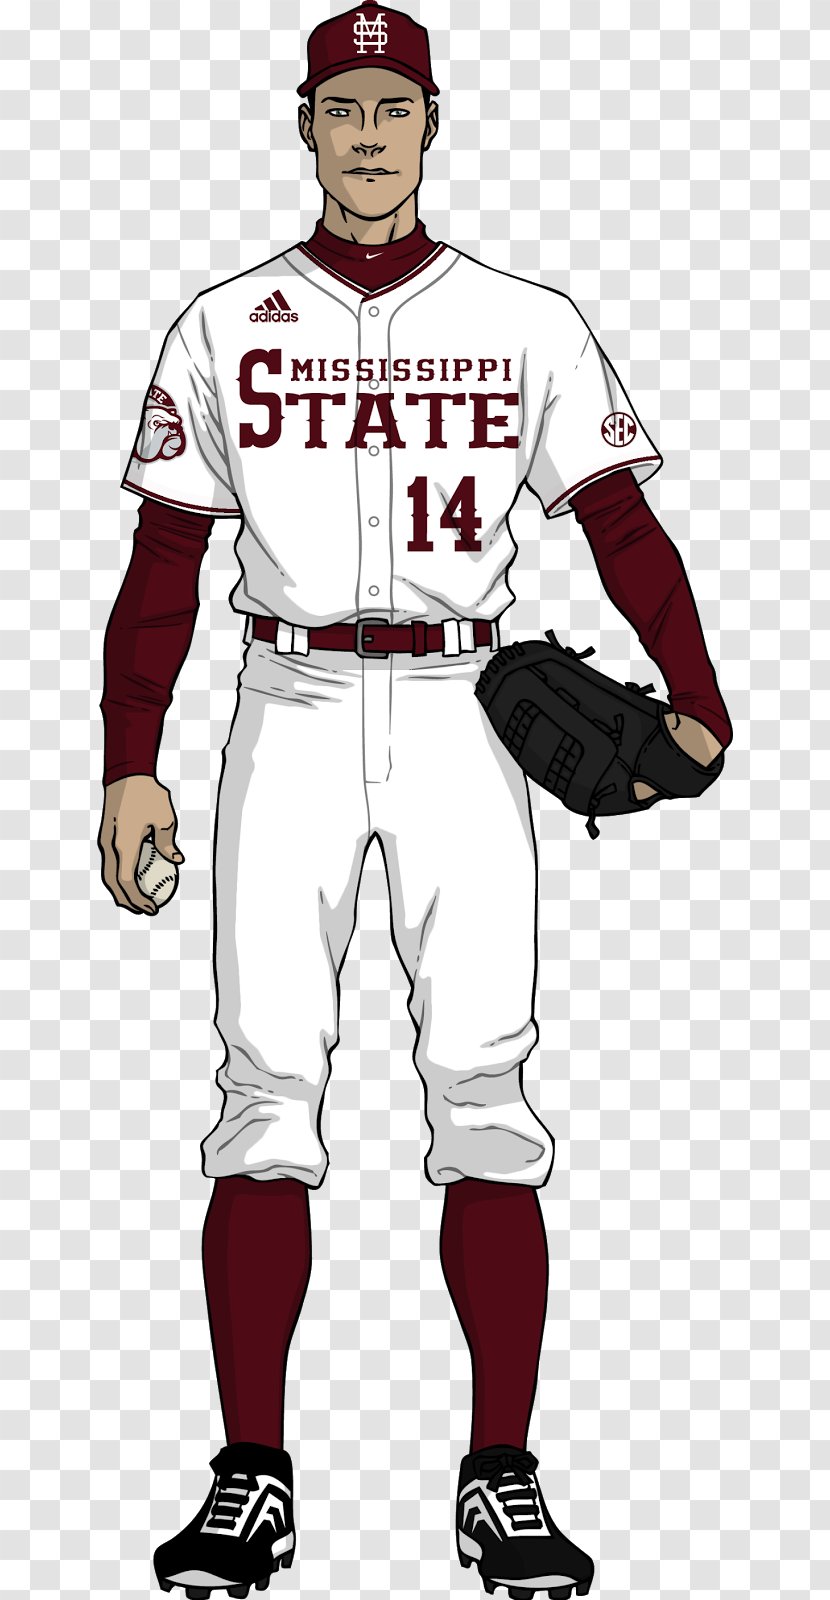 Ole Miss Rebels Baseball Mississippi State Bulldogs Football University Southeastern Conference - Team Transparent PNG